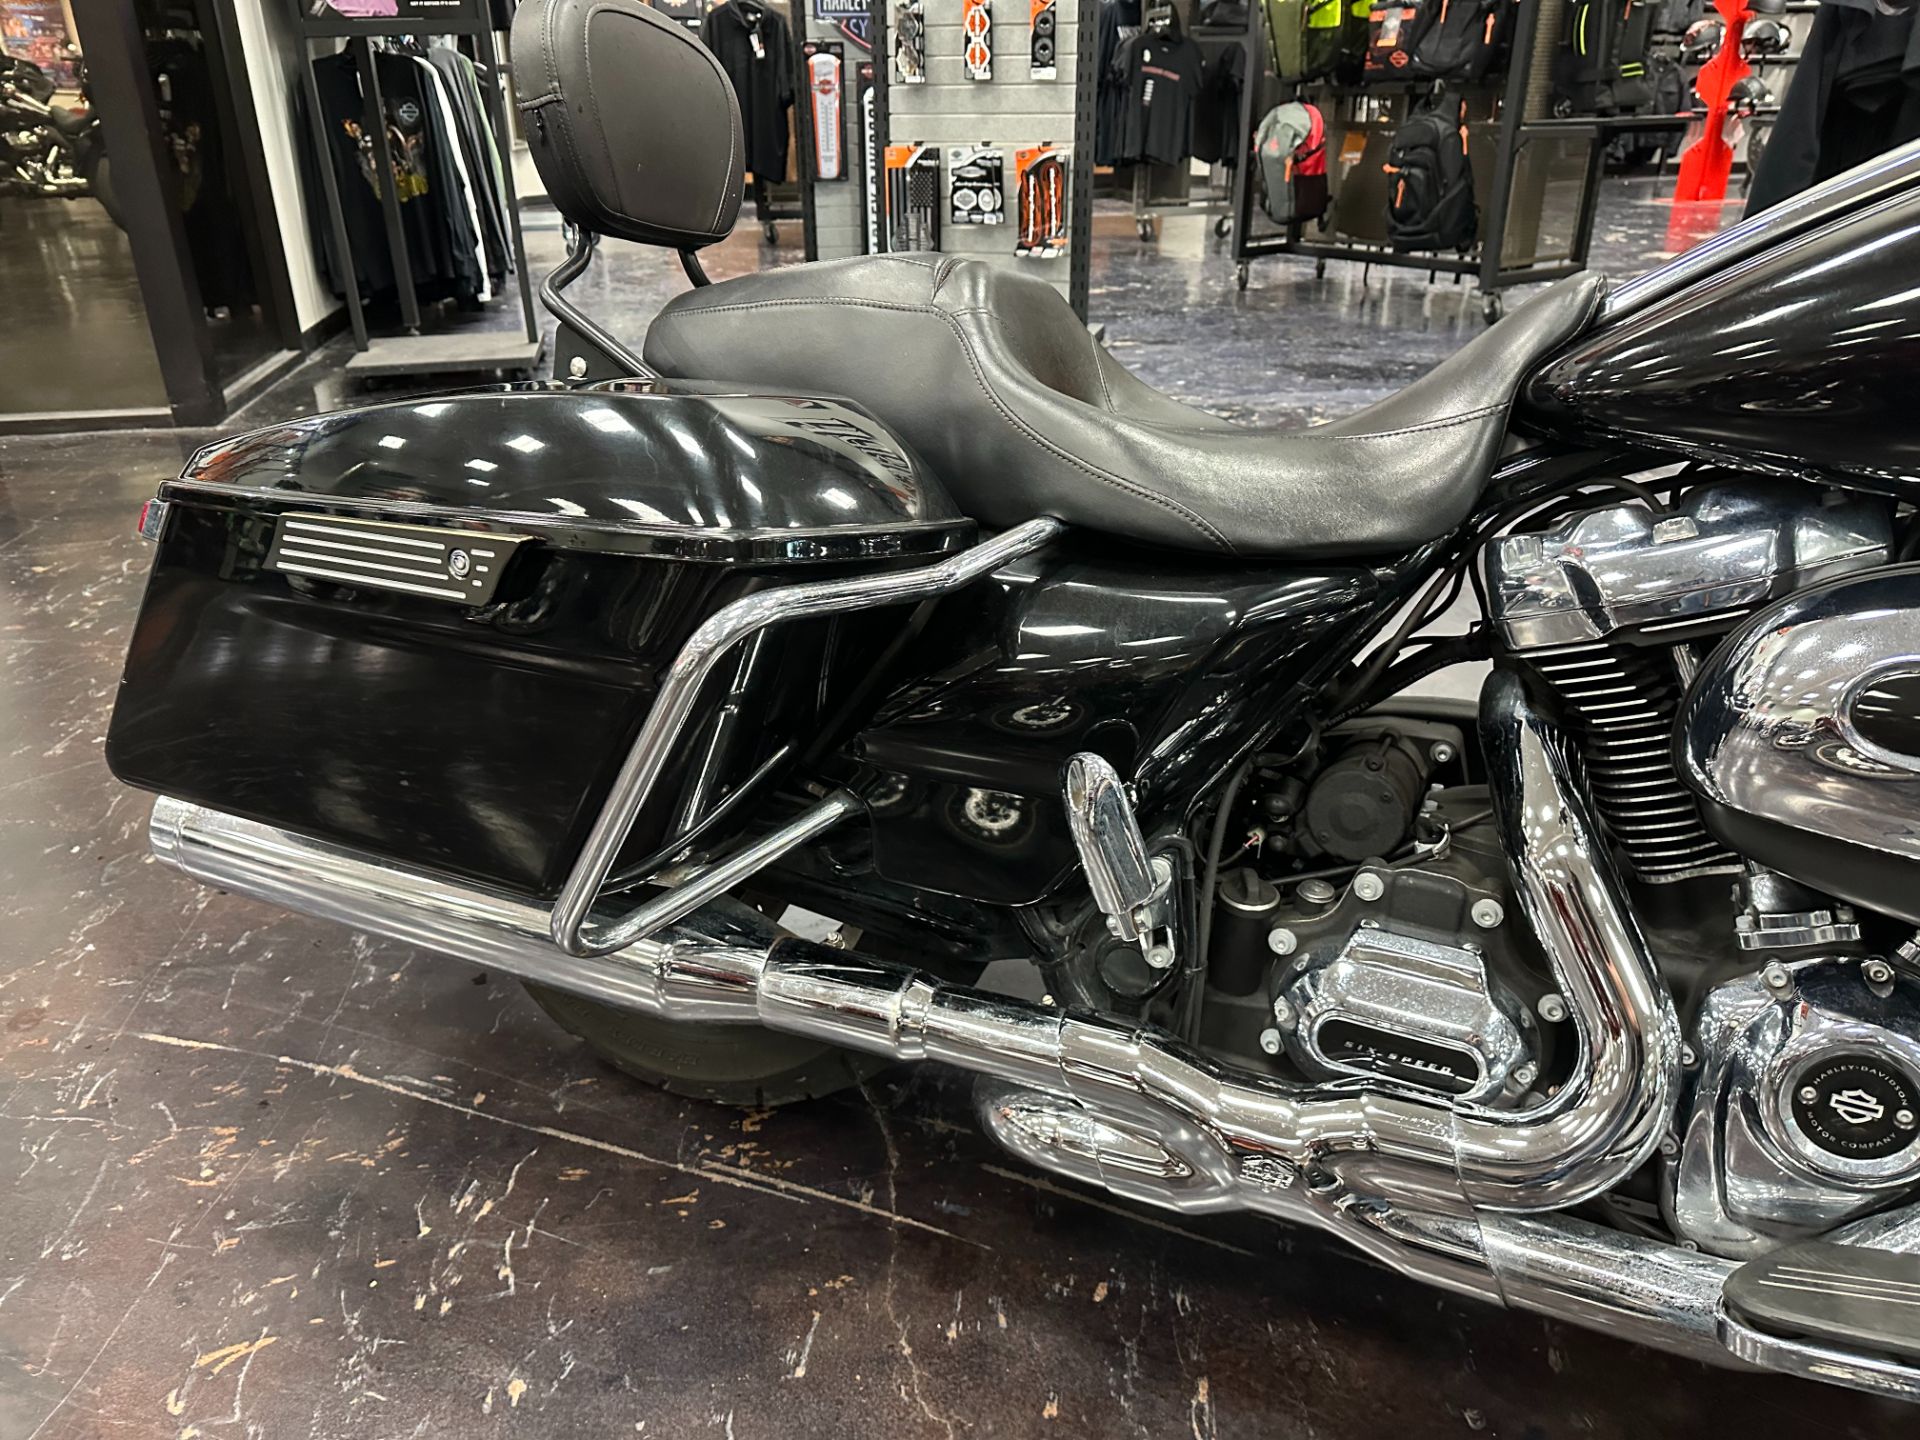 2017 Harley-Davidson Street Glide® Special in Metairie, Louisiana - Photo 8